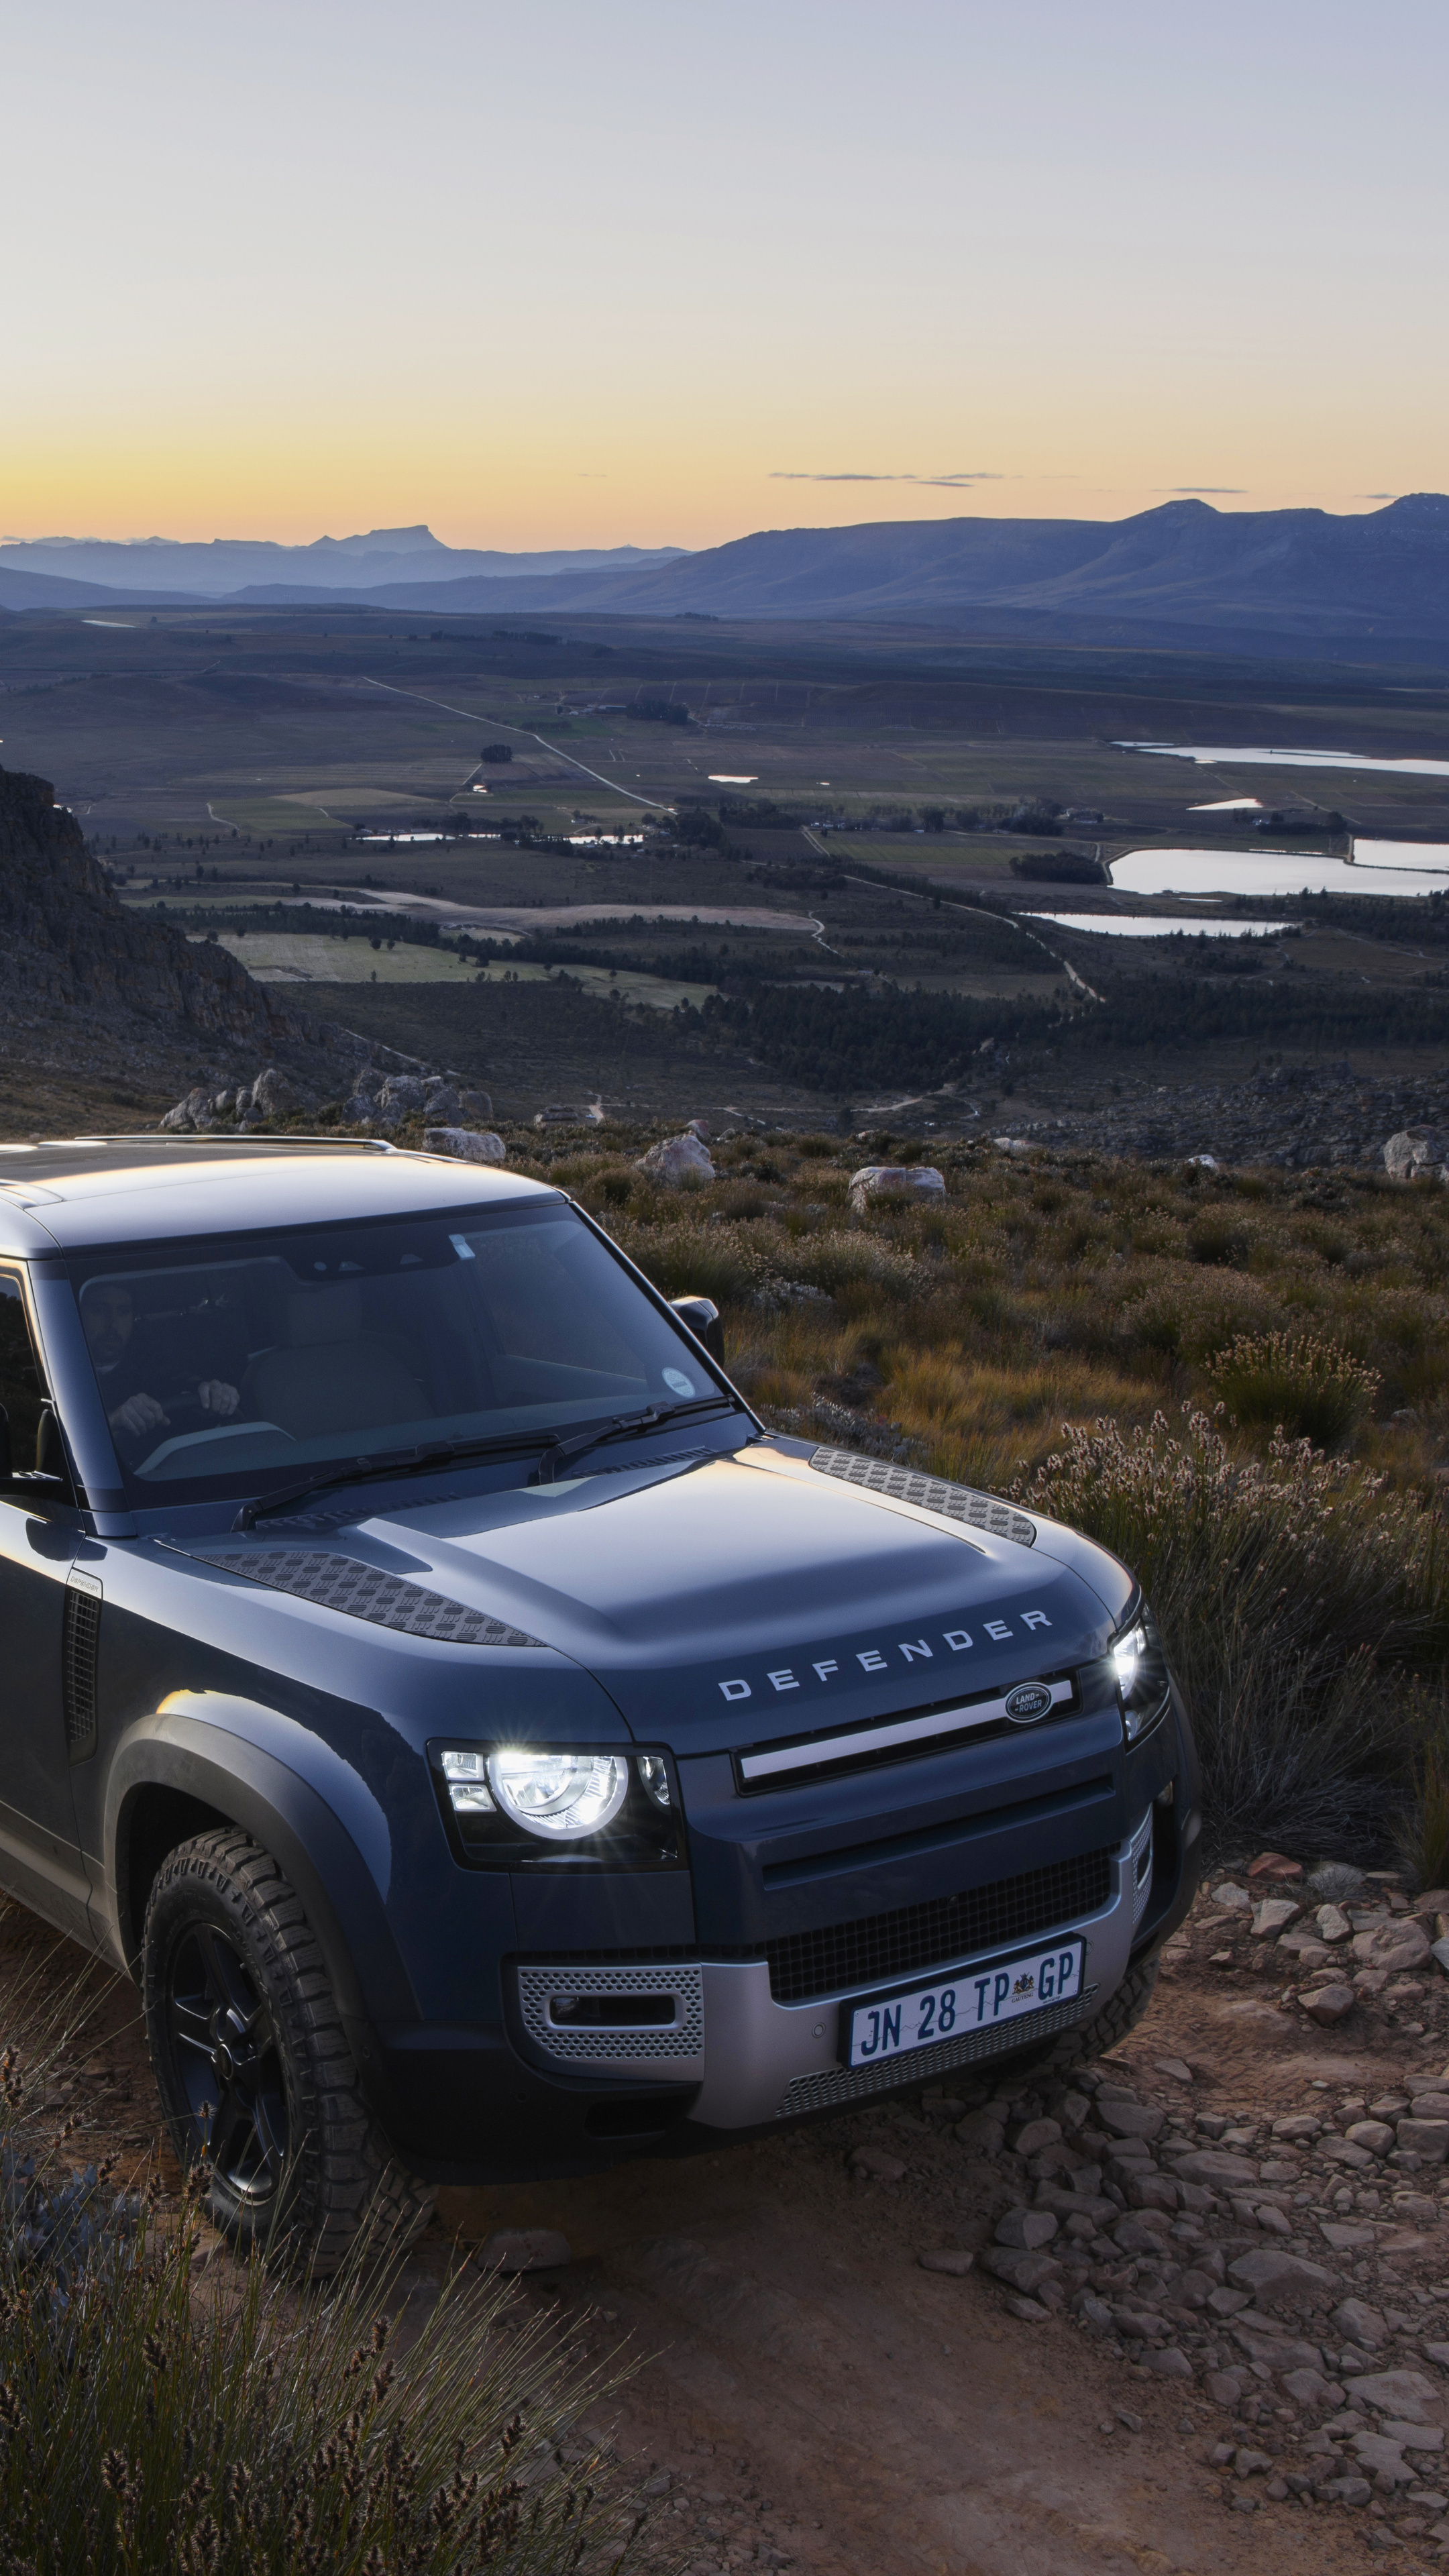 Land Rover Defender, 110 D240 S Country Pack, 2021 model, Sony Xperia, 2160x3840 4K Phone